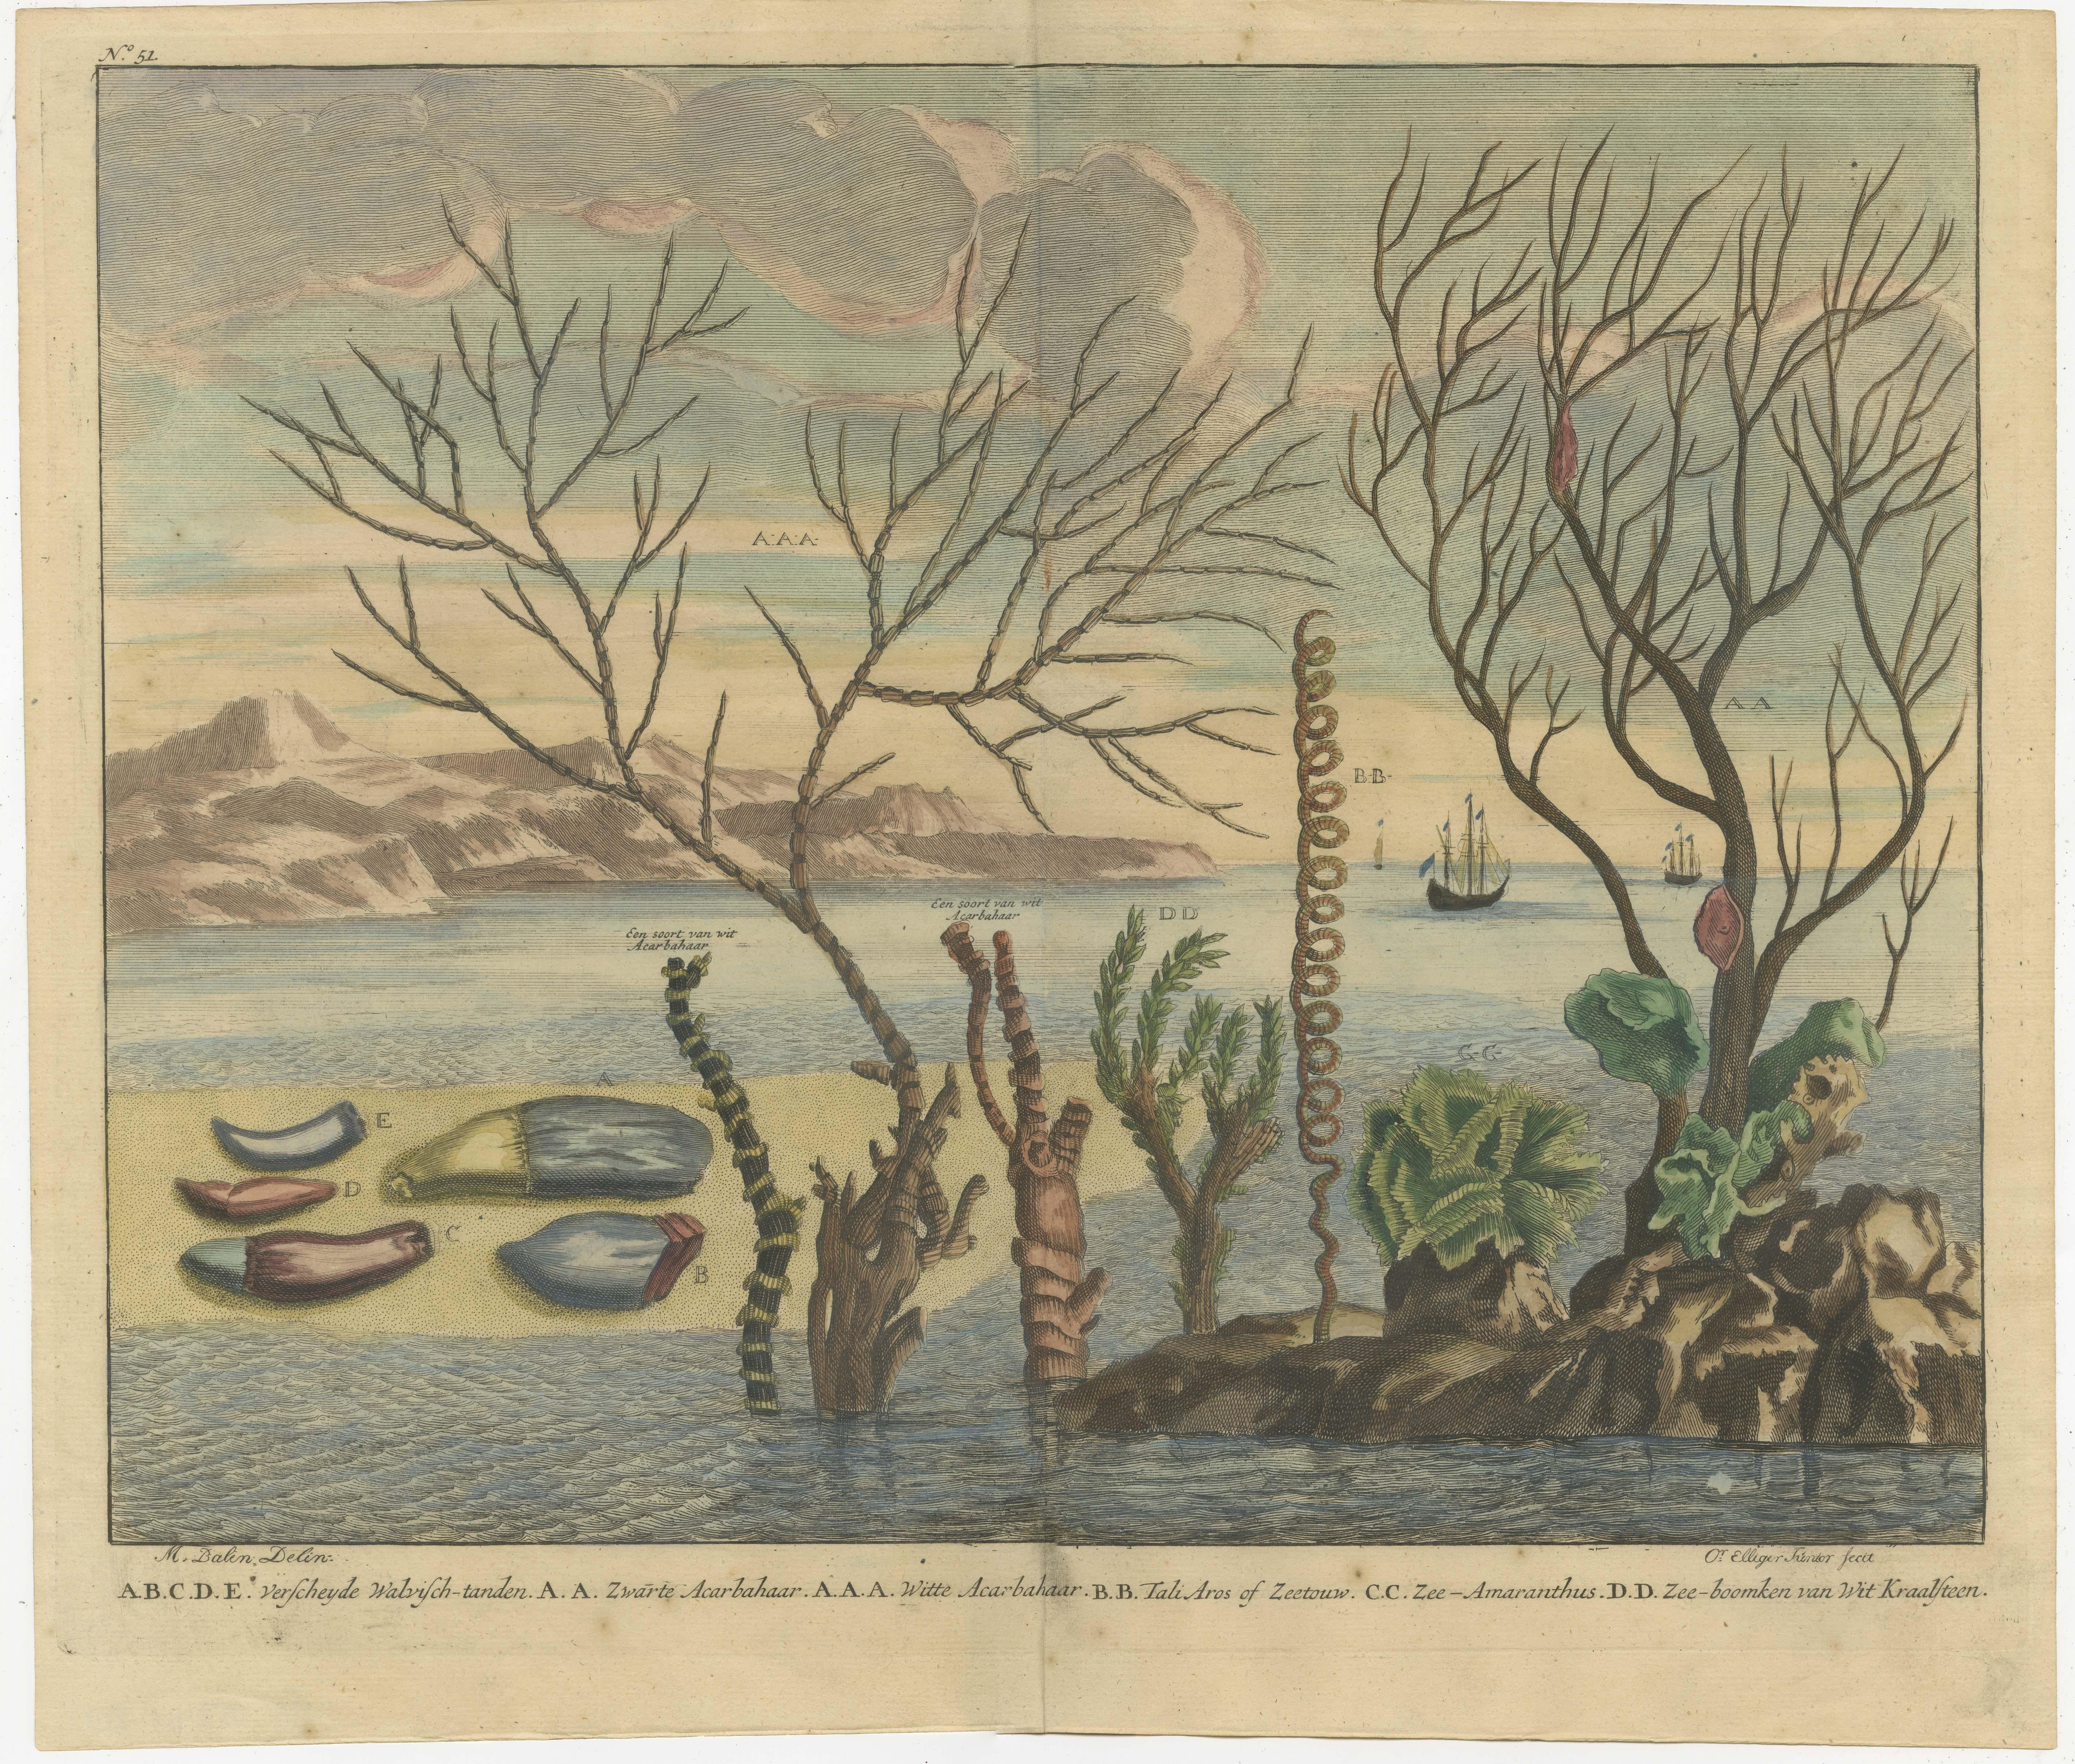 Antique print titled 'Verscheyde Walvisch-tanden - Zwarte Acarbahaar (..)'. This print depicts various water plants including coral native to South East Asia/Indonesia. On the left five whale teeth. In the background sailing vessels.

François